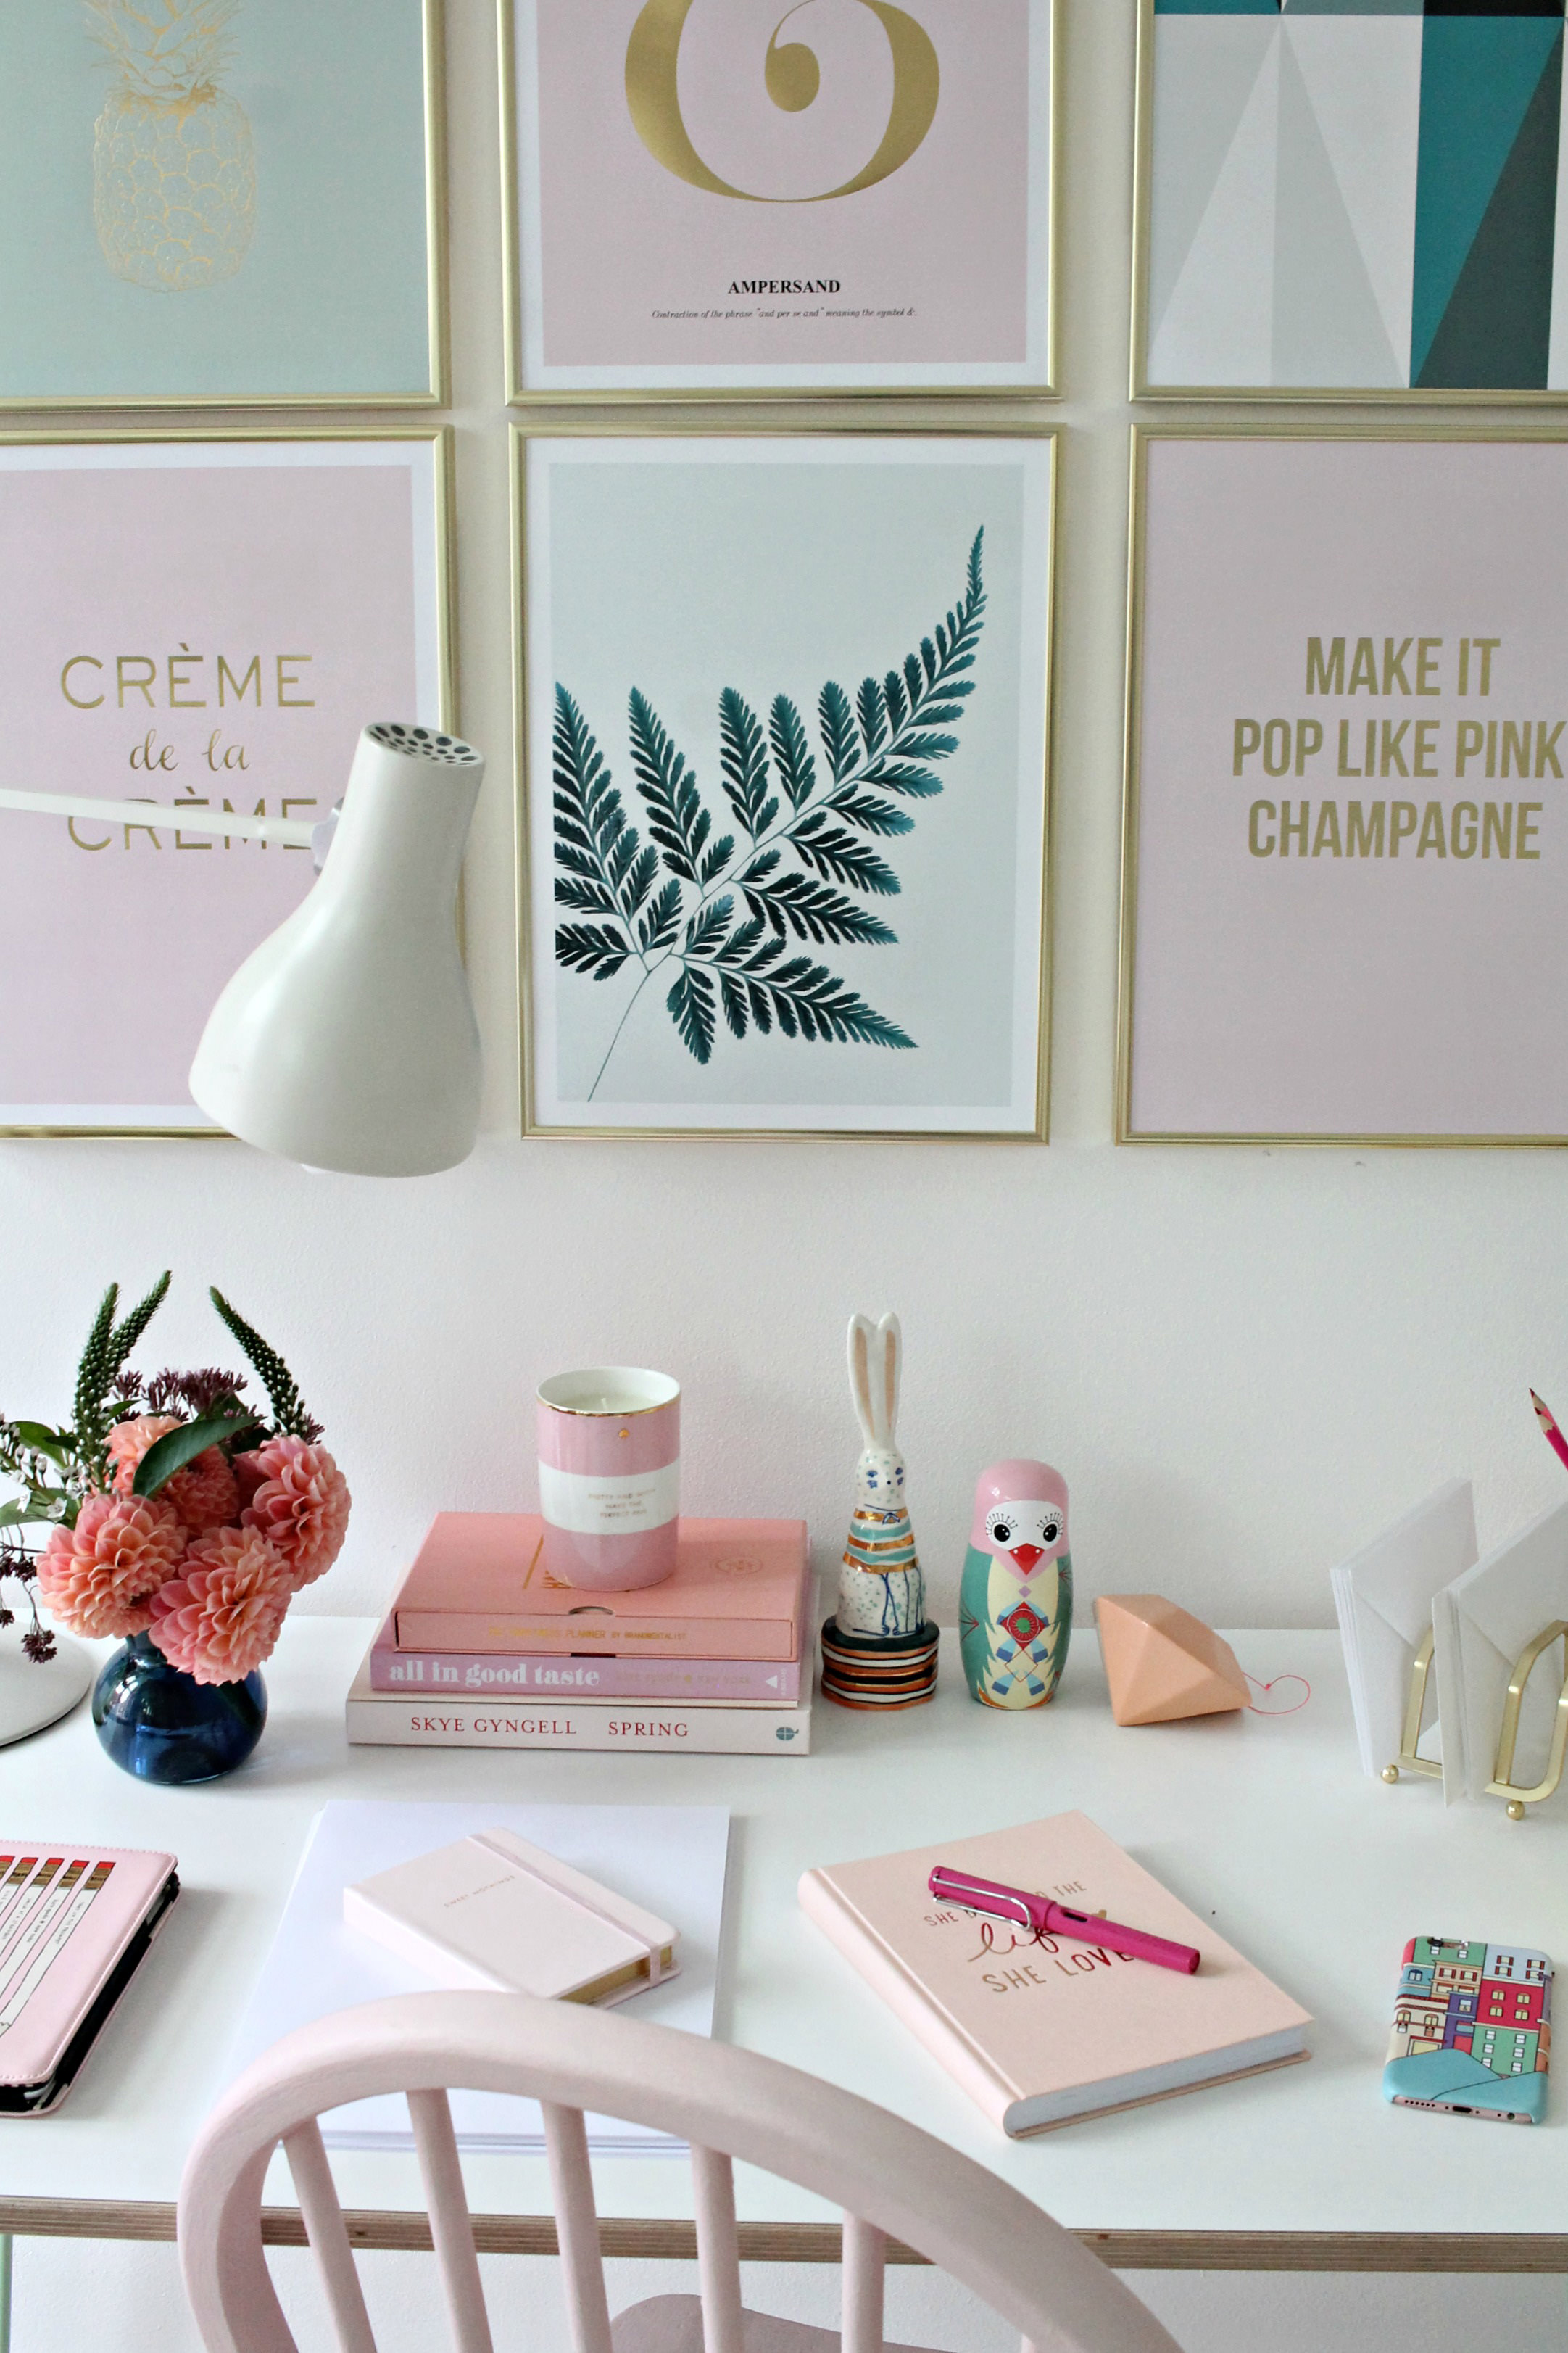 4 Workspace styles and pens to match your personality.